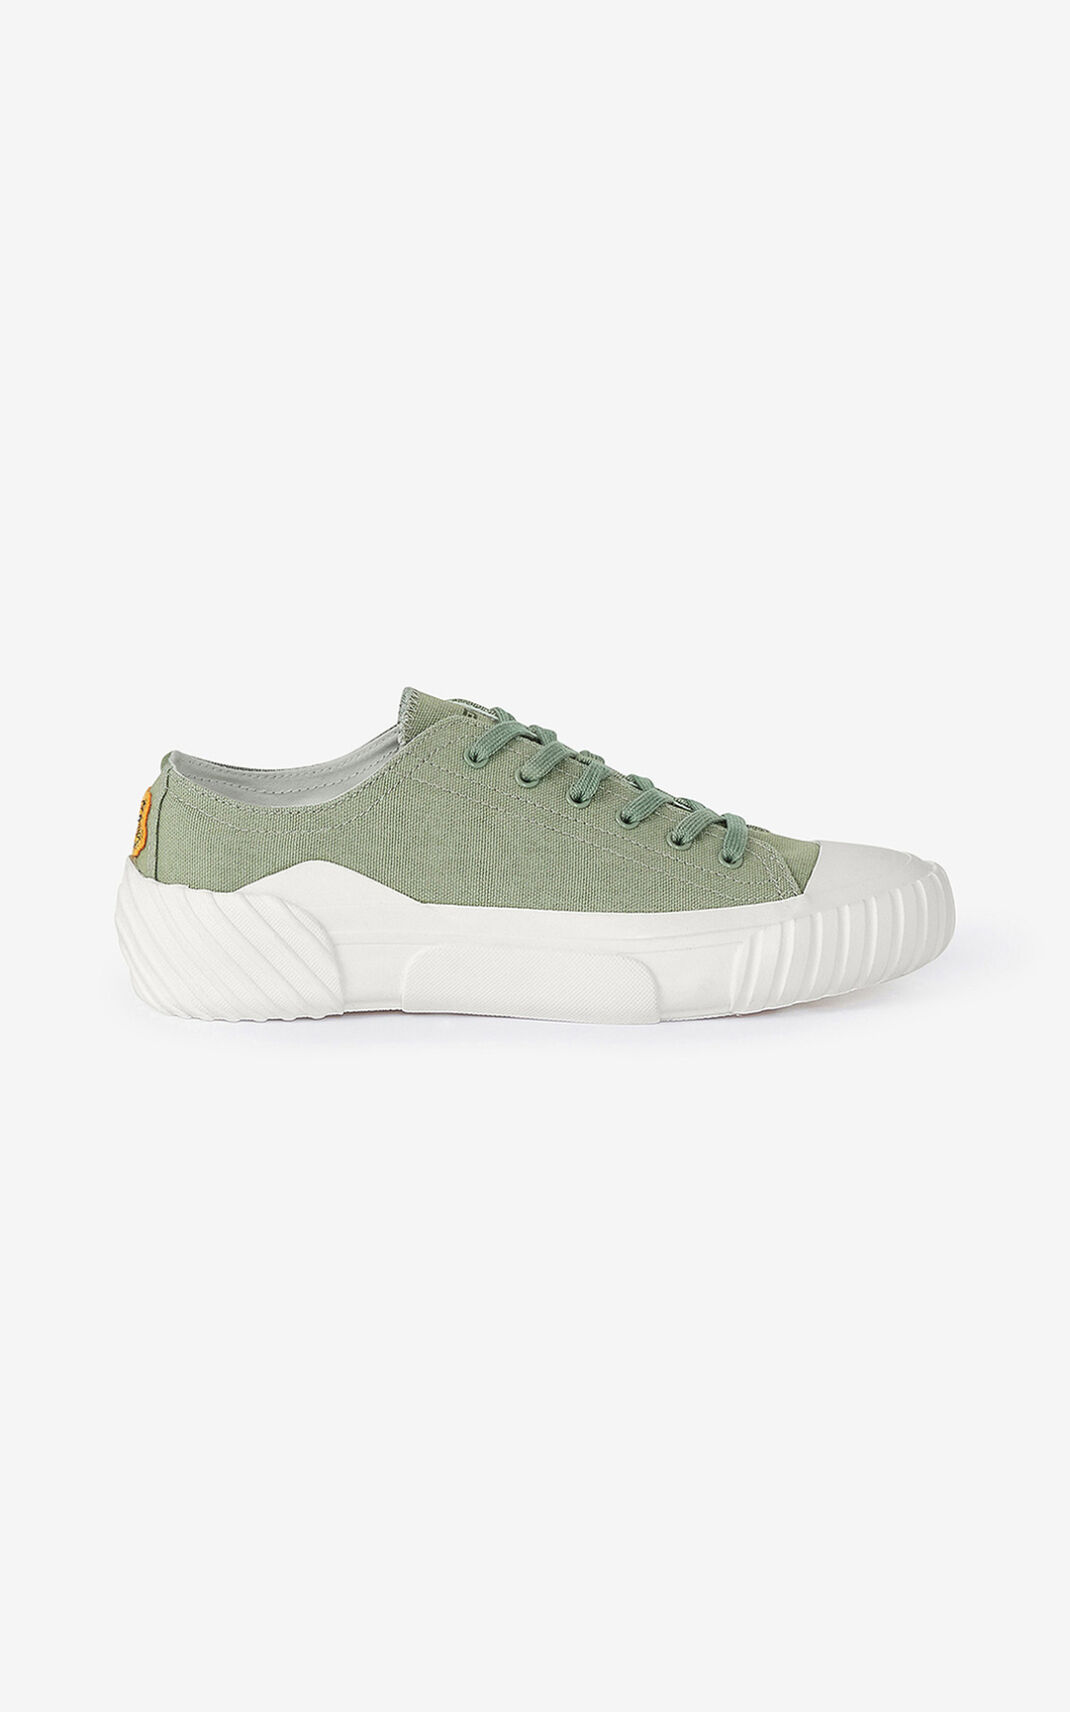 Kenzo Tiger Crest Sneakers Light Green For Womens 0516VDIFC